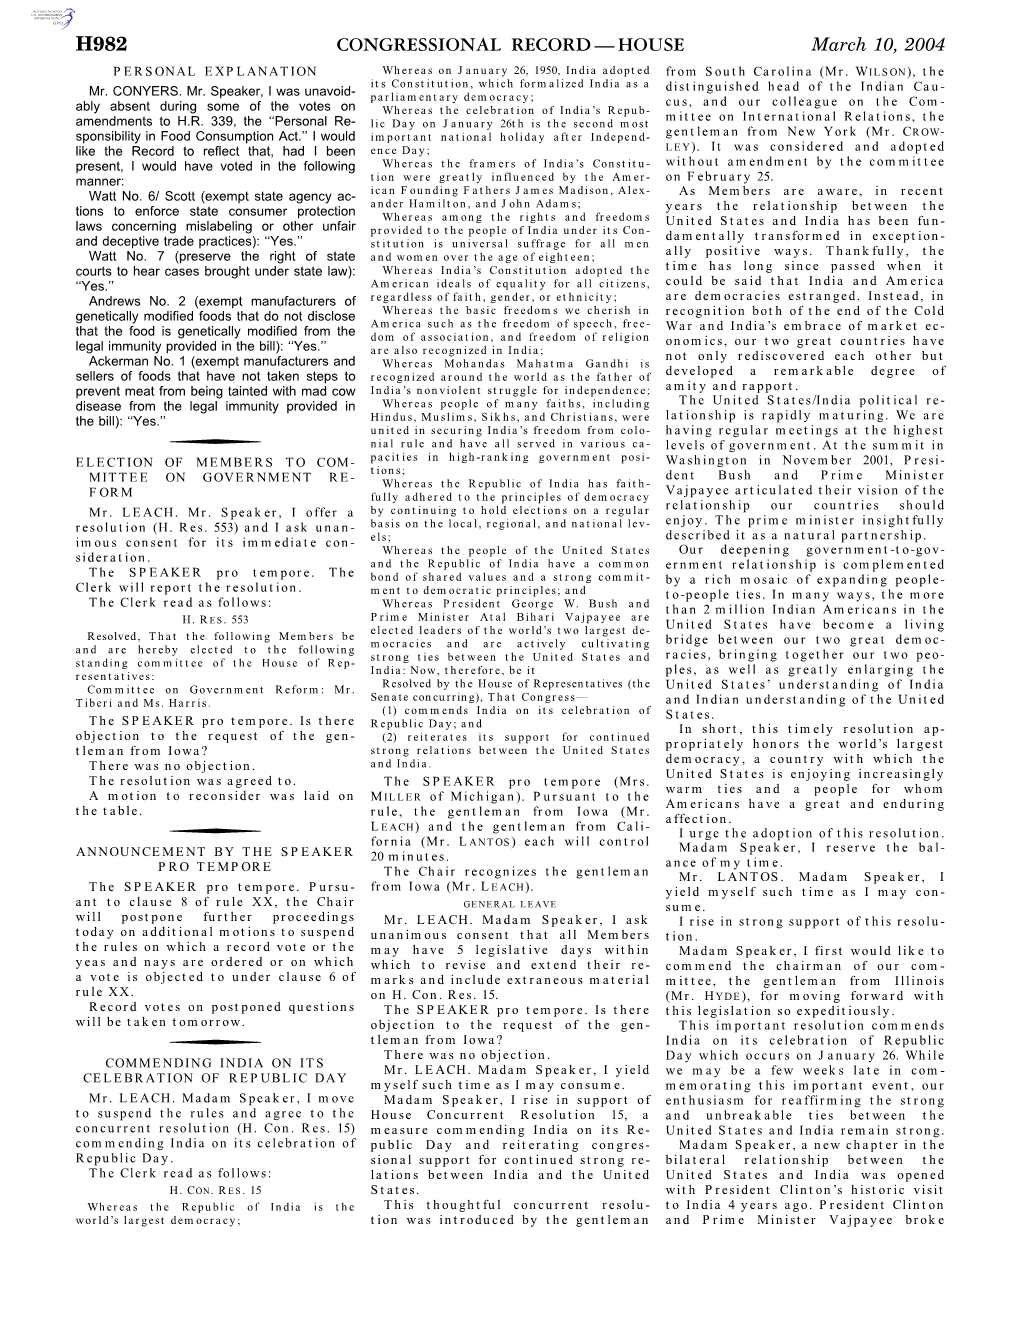 Congressional Record—House H982